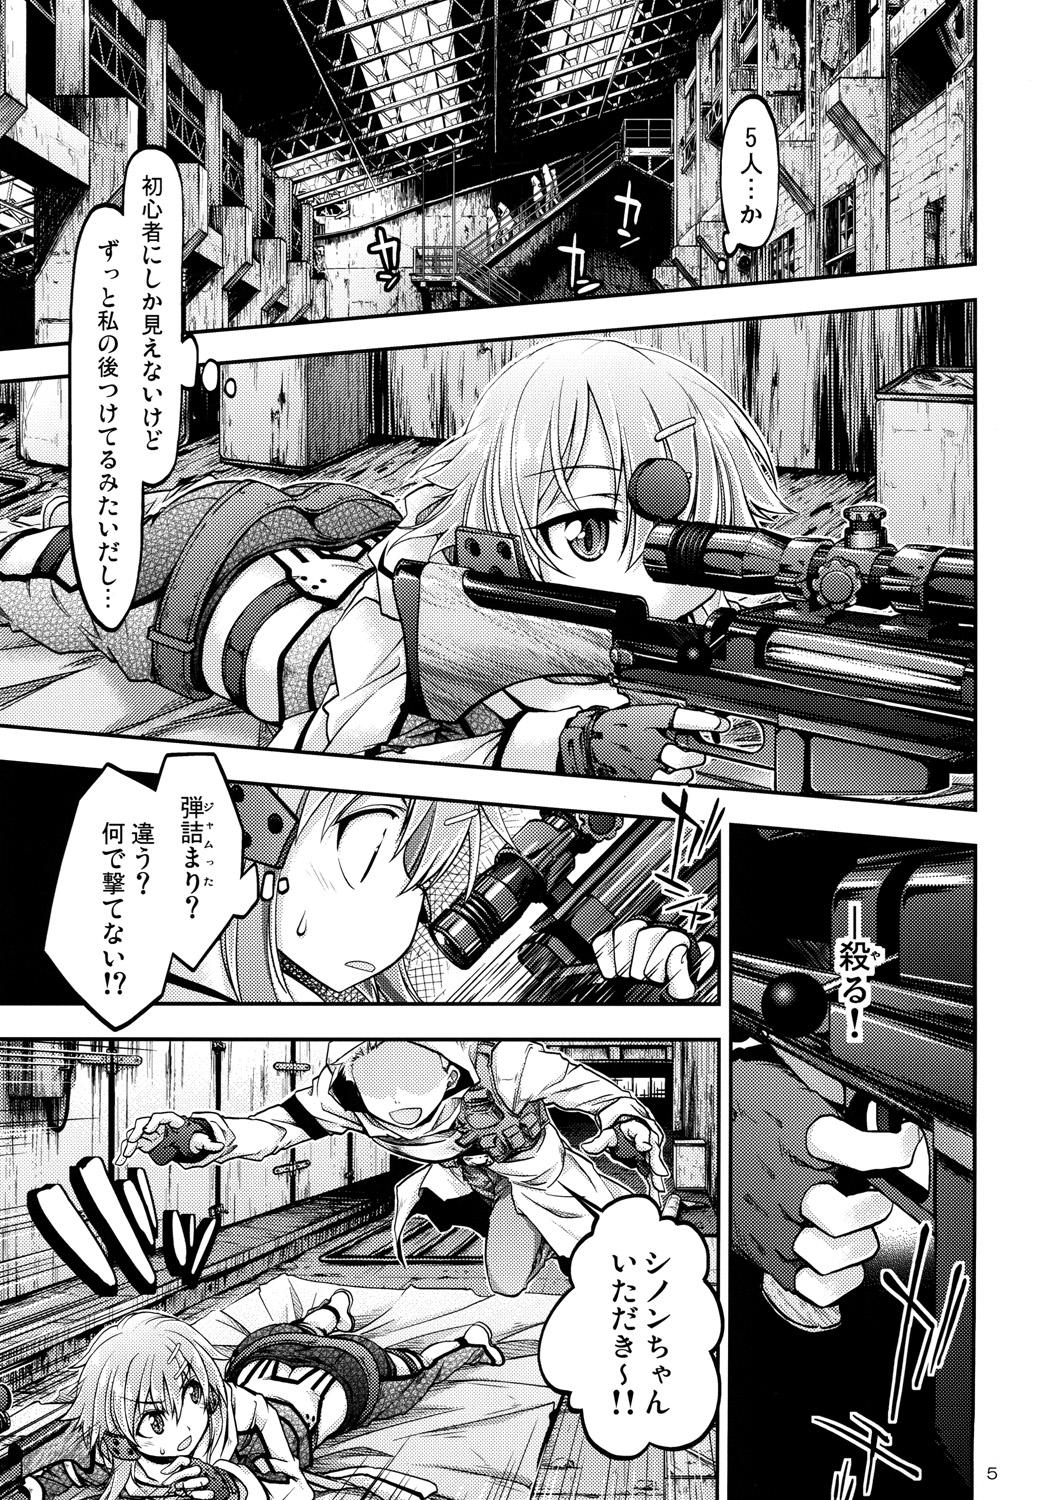 Rimming Gspot - Sword art online Leche - Page 4